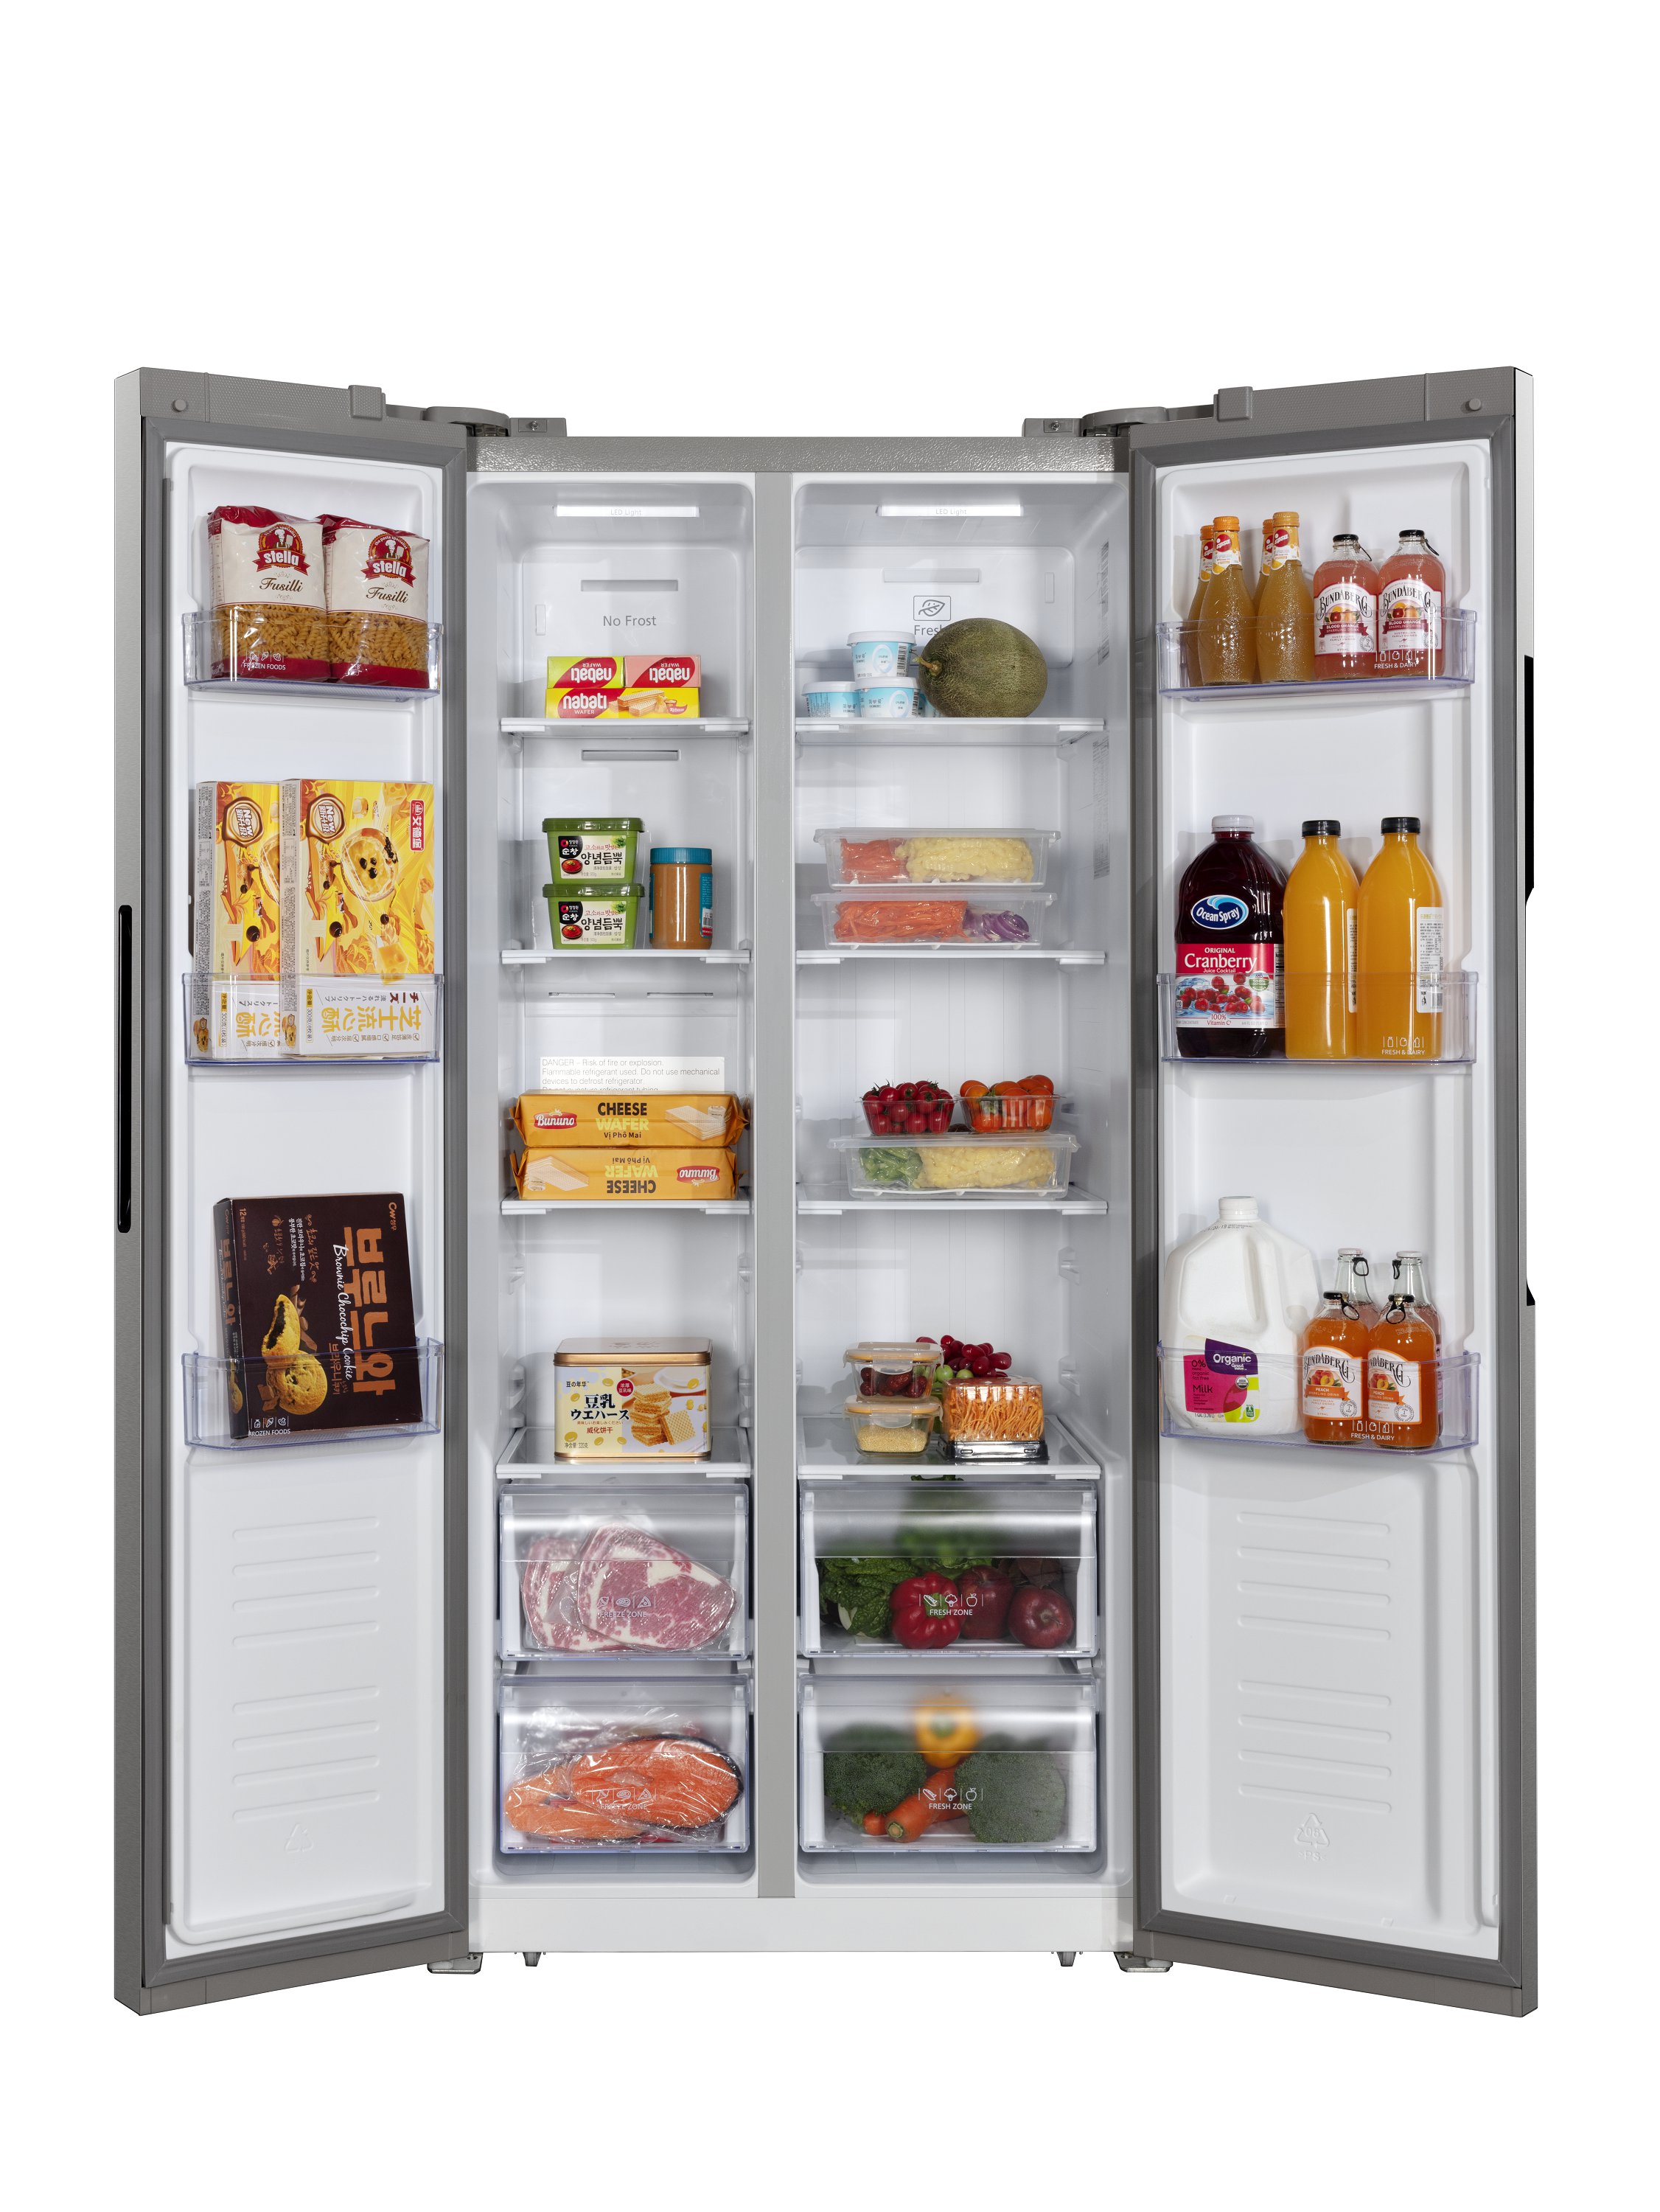 Hamilton Beach 15.6 cu. Ft. Side by side Stainless Refrigerator, Freestanding Installation, HZ8551 - image 2 of 6